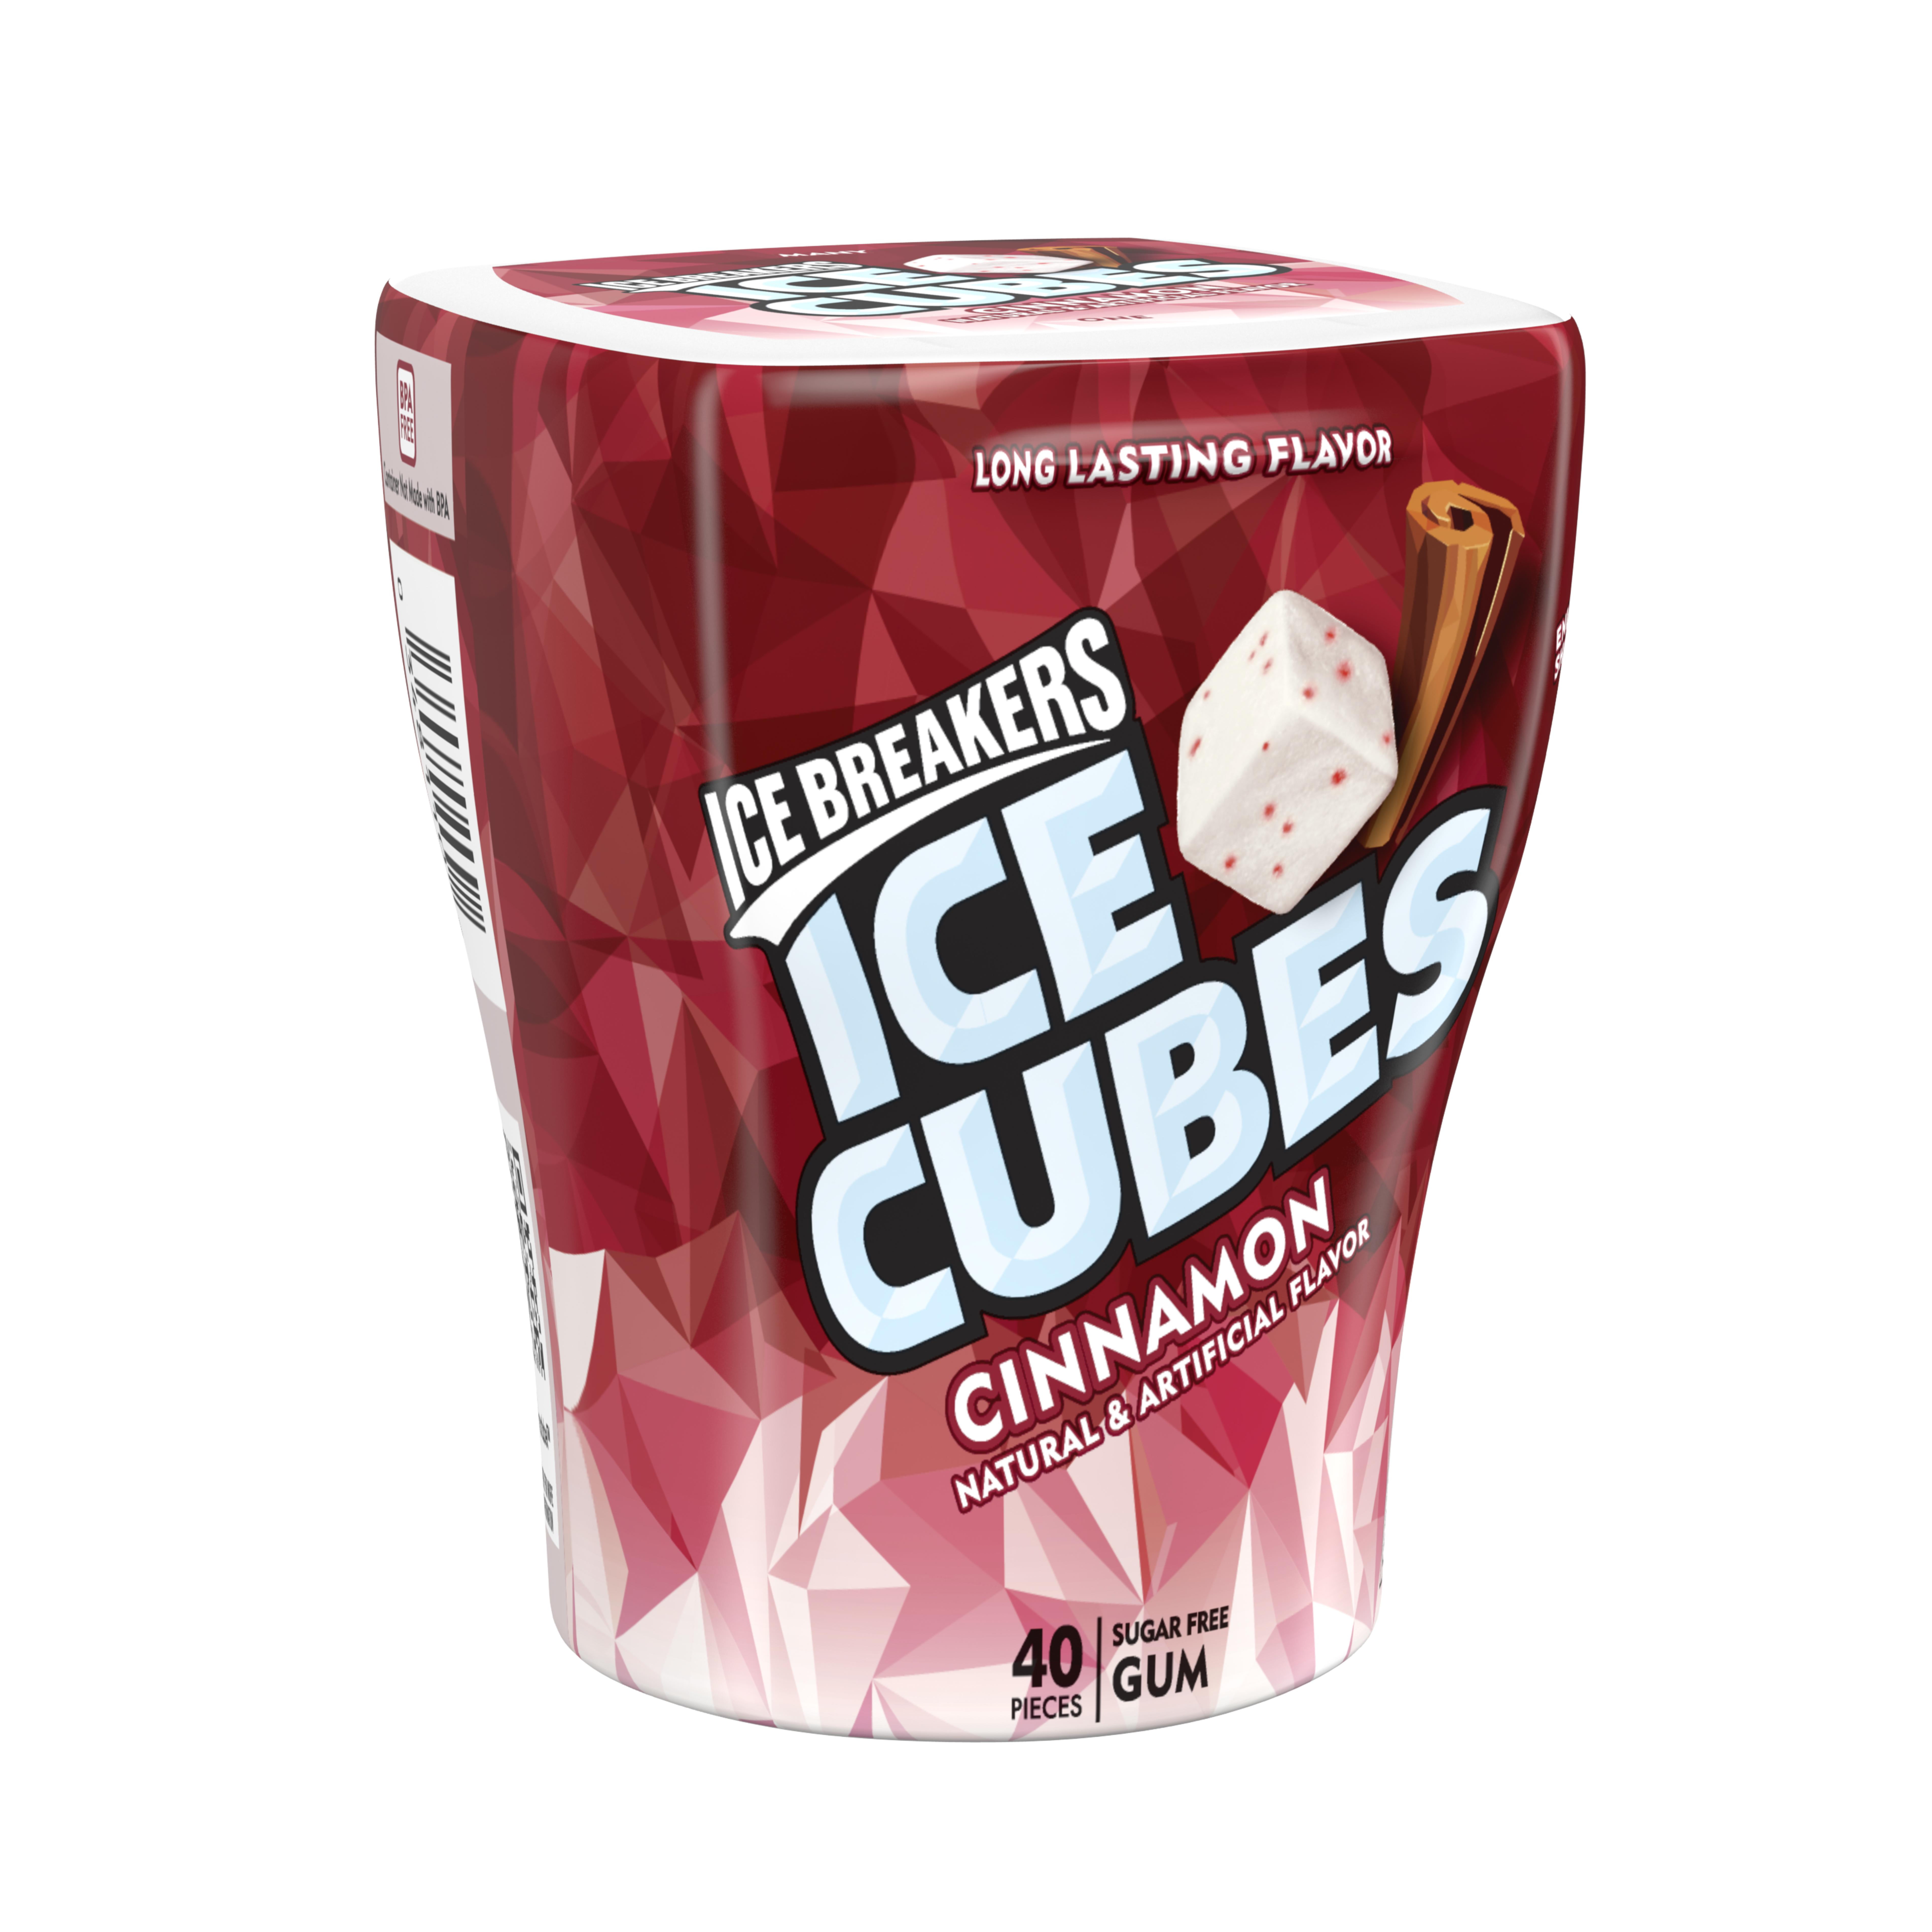 ICE BREAKERS ICE CUBES Cinnamon Flavored Sugar Free Chewing Gum, Made with Xylitol, 3.24 oz, Bottle (40 Pieces)